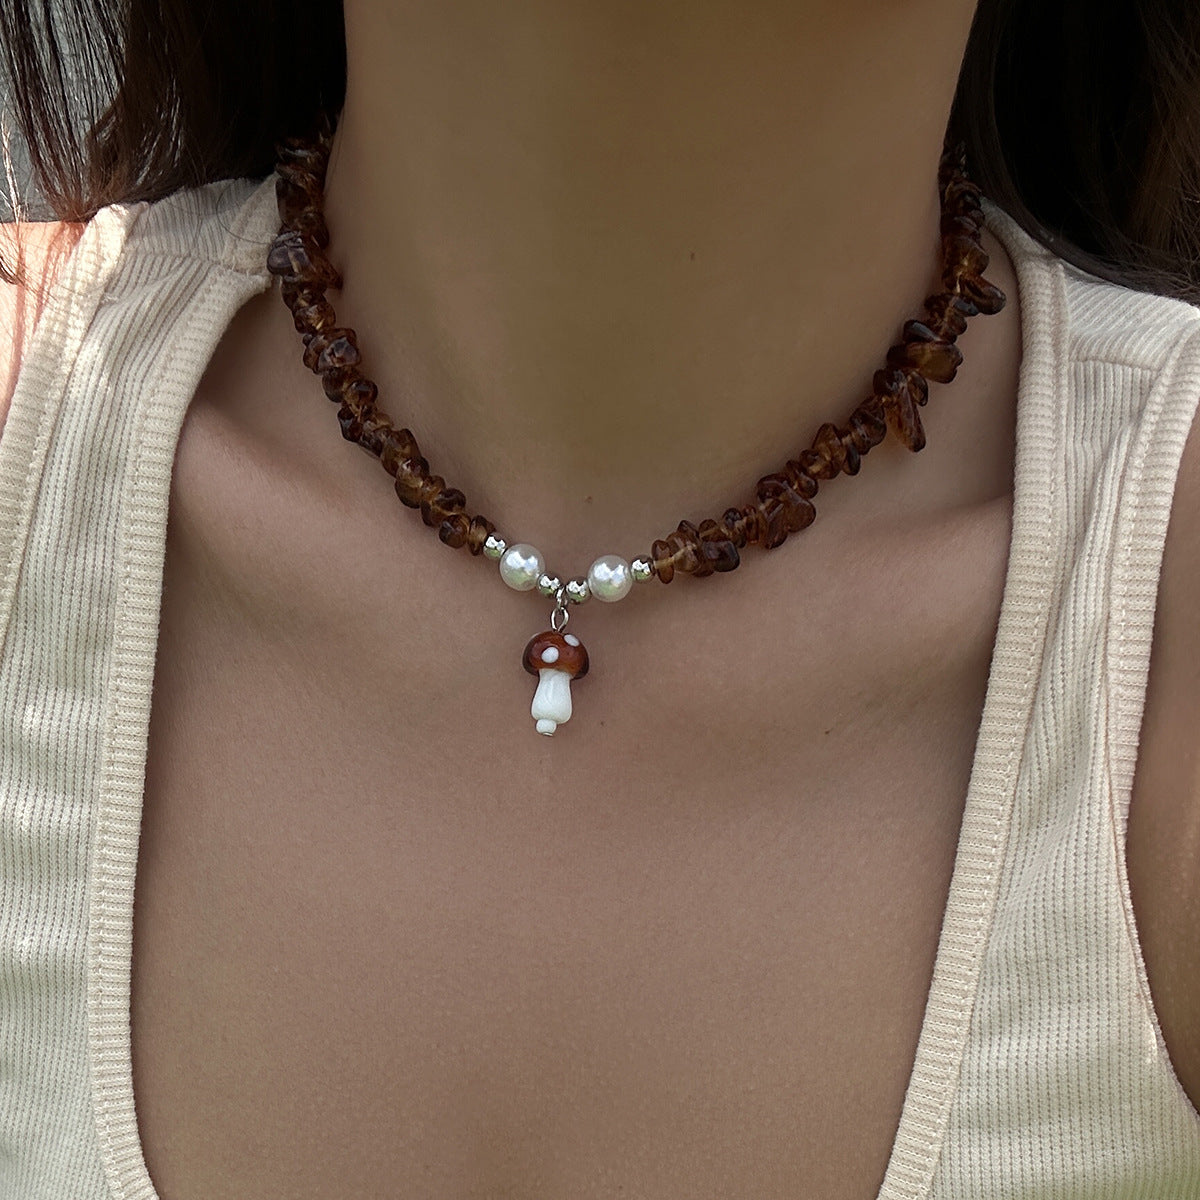 Colorful Irregular Gravel Clavicle Necklace with Dainty Mushroom Pendant